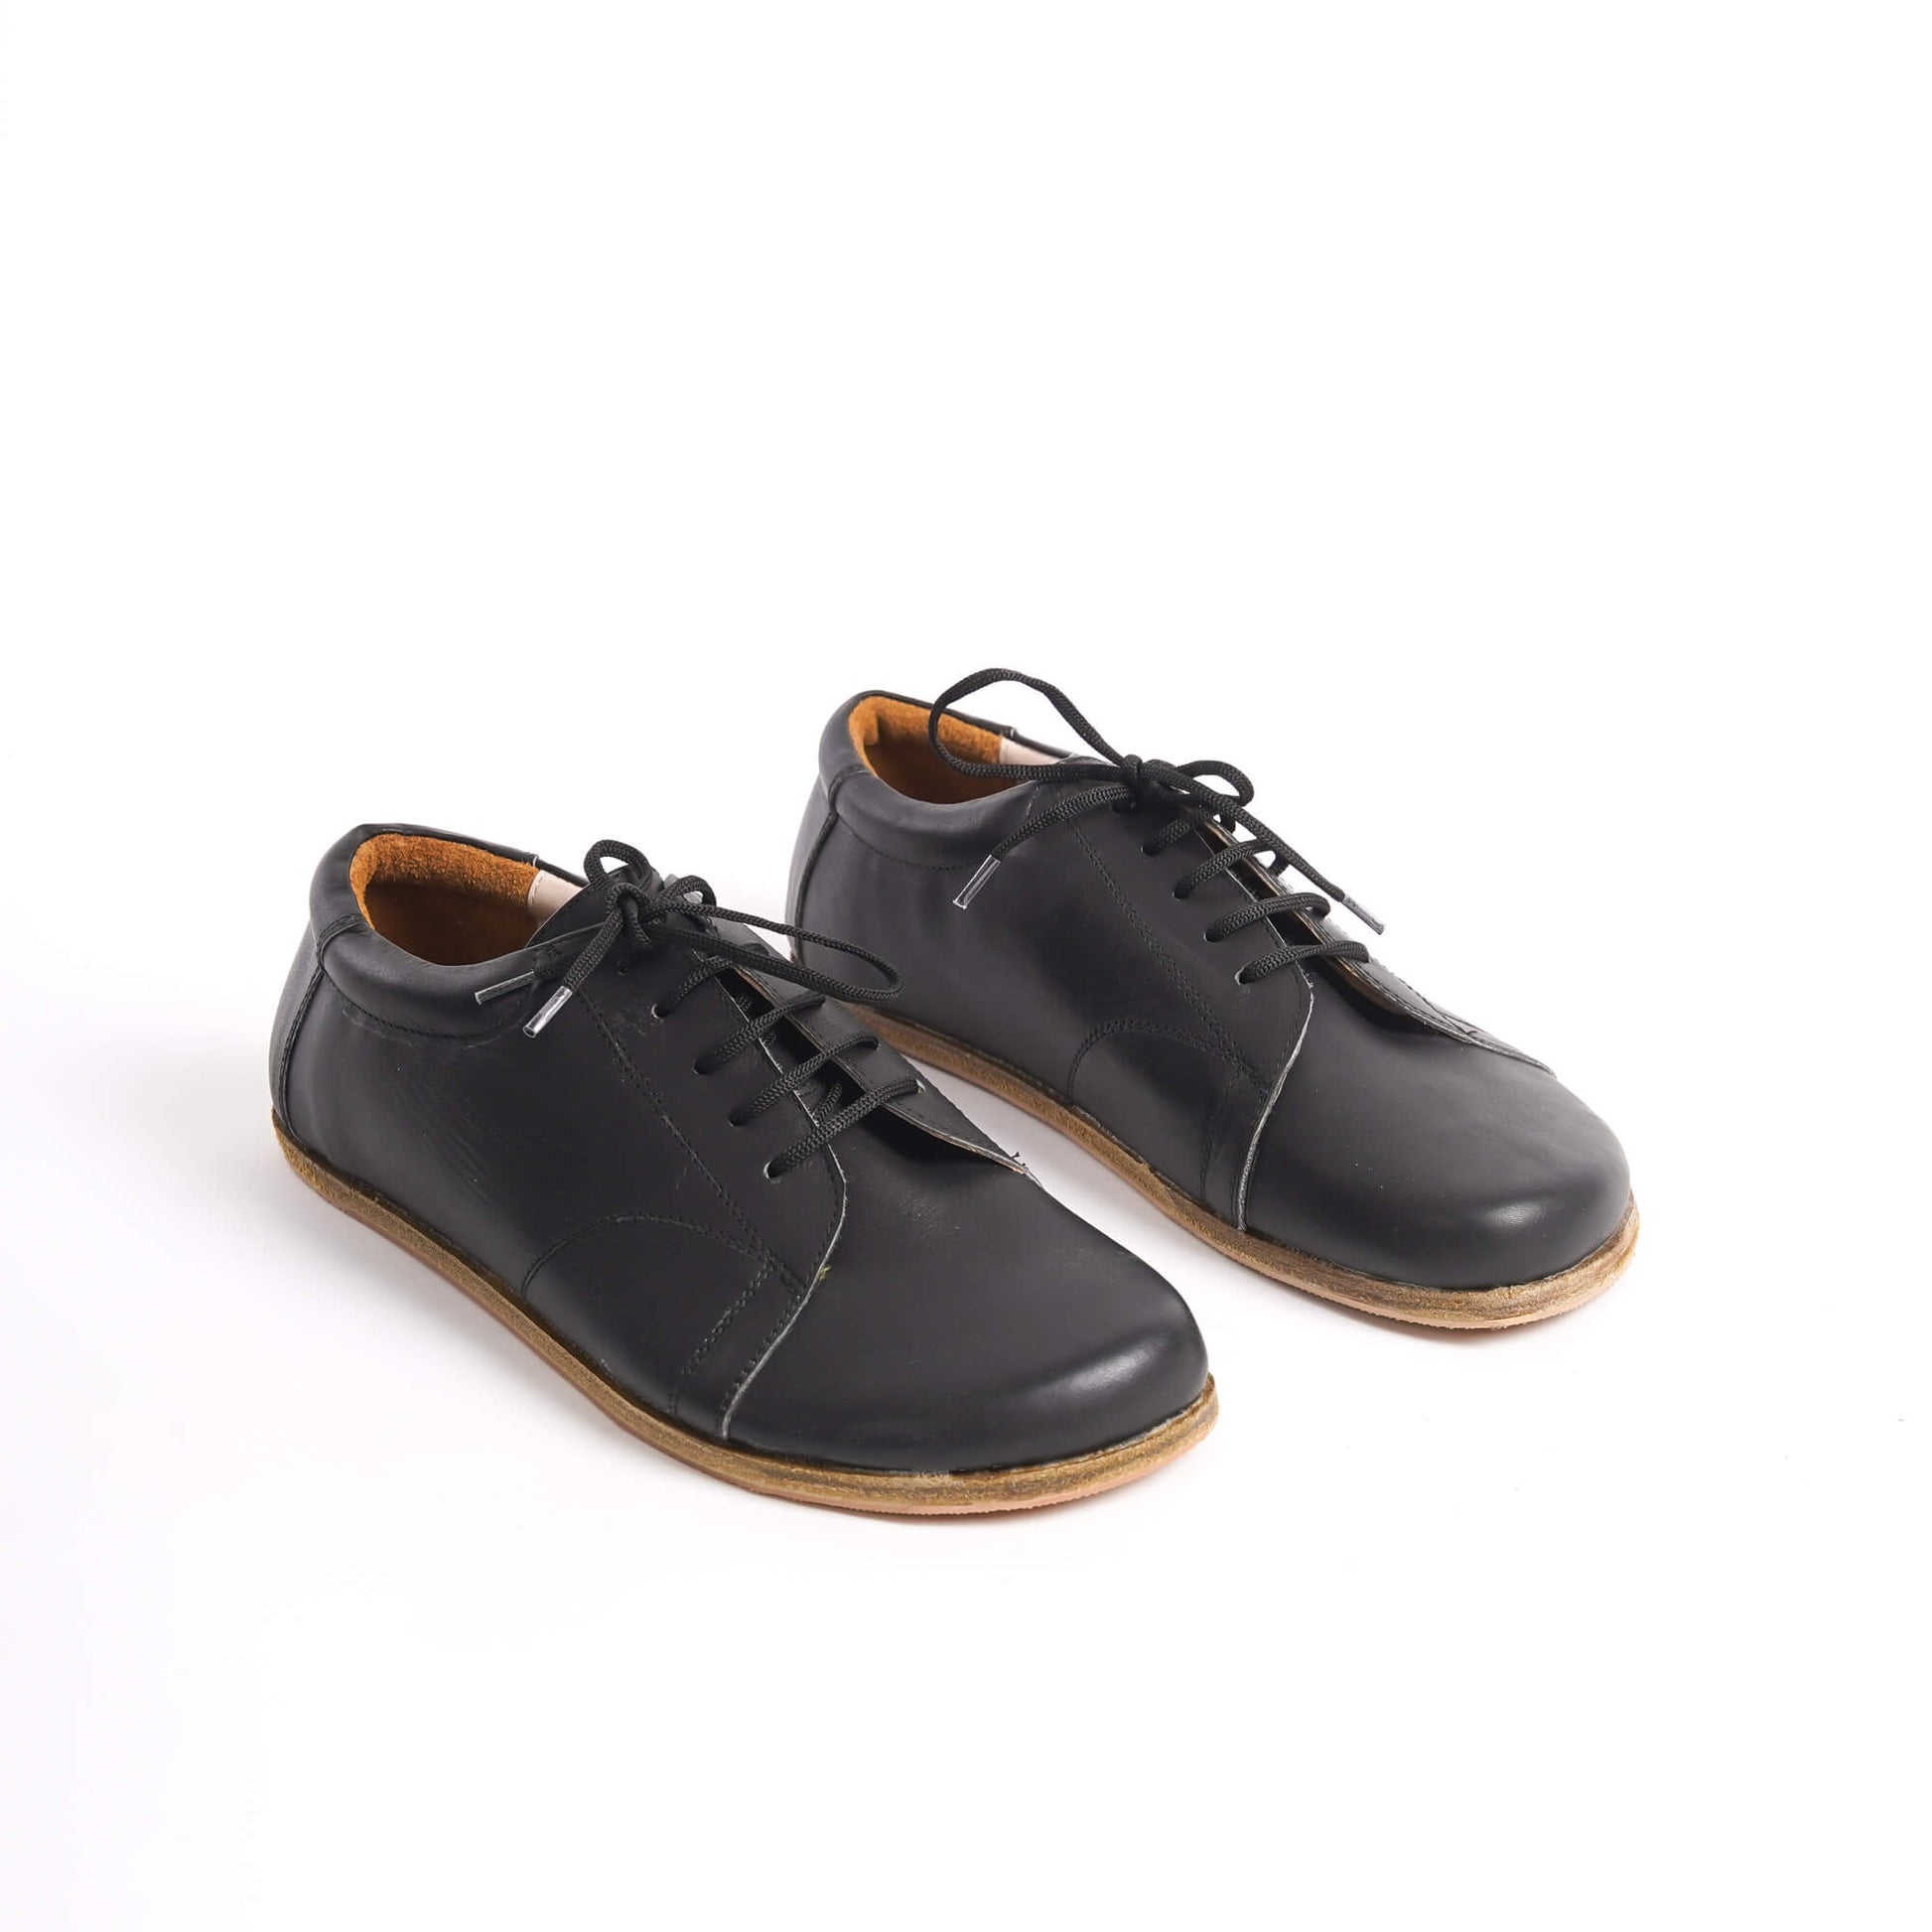 Black Lydia Leather Barefoot Men's Sneakers with lace-up design, made from genuine leather for superior comfort and durability.